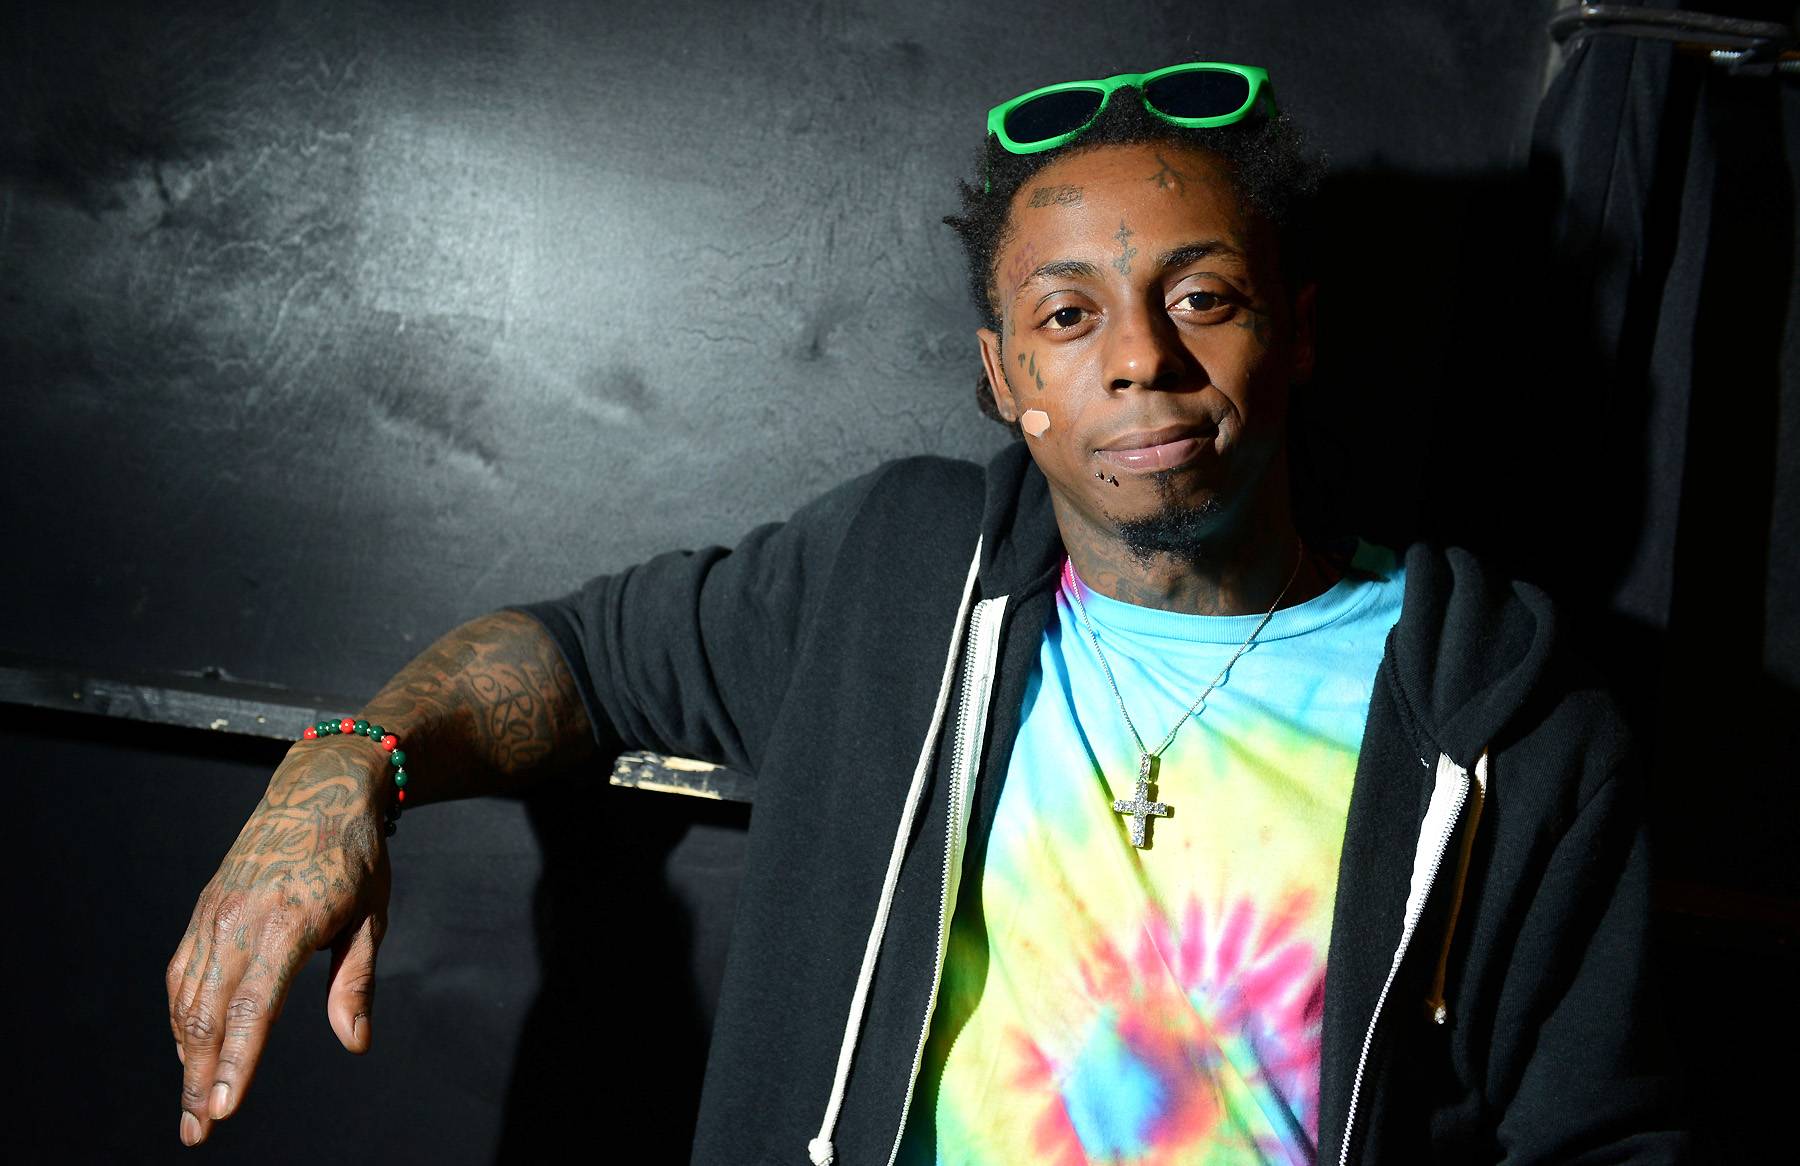 Lil Wayne @LilTunechi - Tweet: &quot;R.I.P. Lord Infamous. One of the best of us.&quot;(Photo by Jordan Strauss/Invision/AP, File)